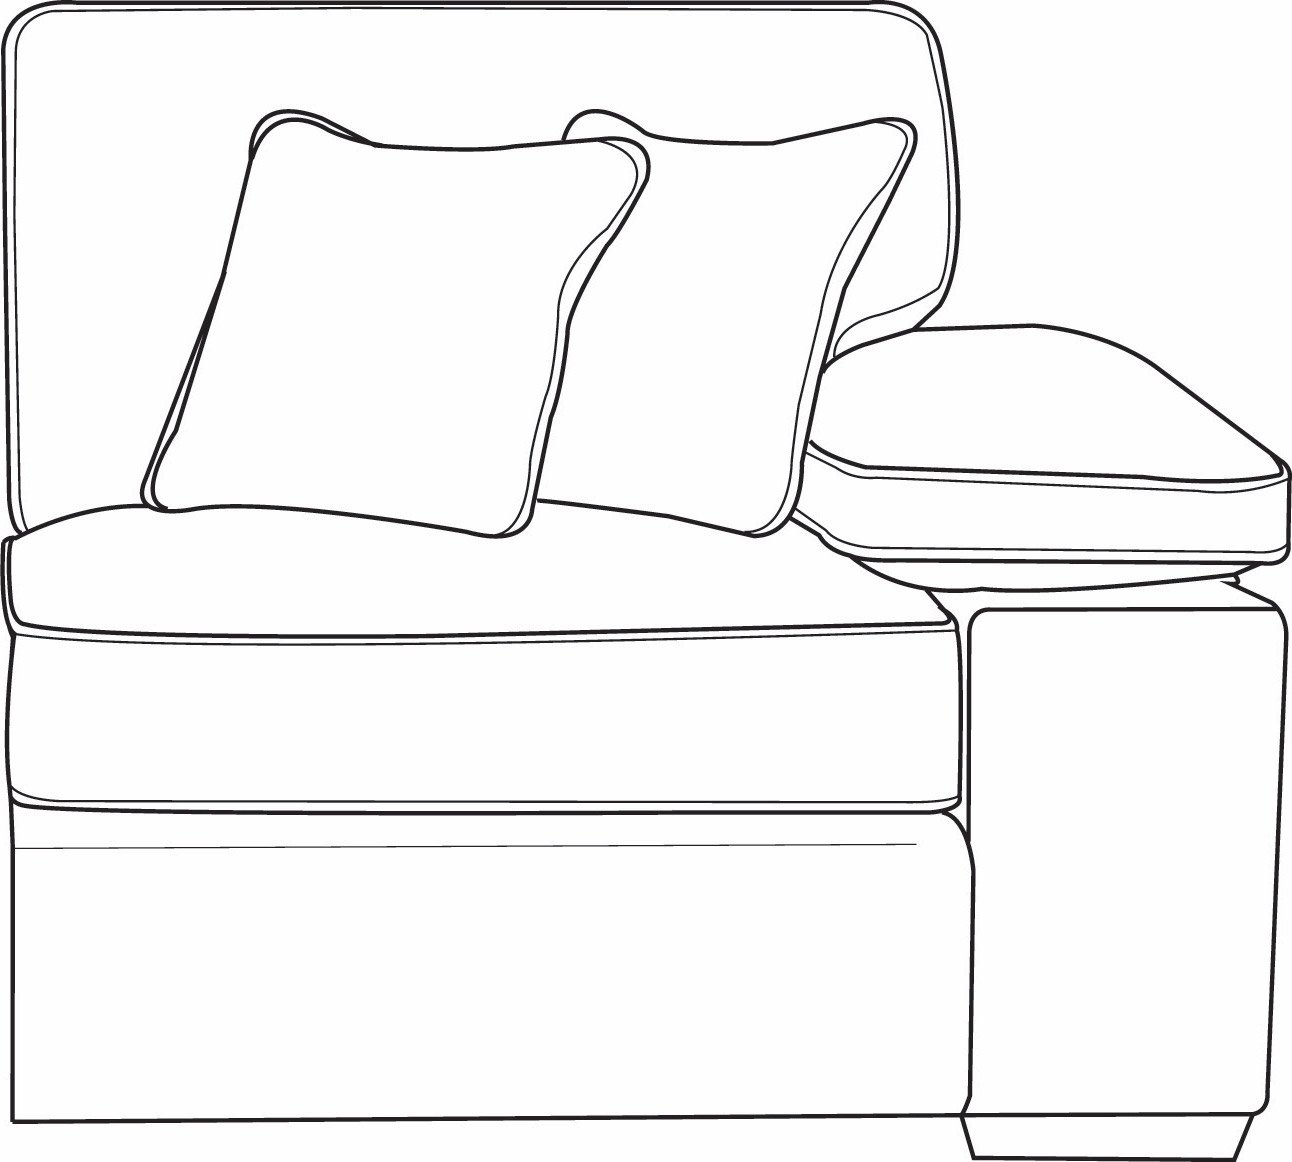 Right 1 Seater Sofa Section